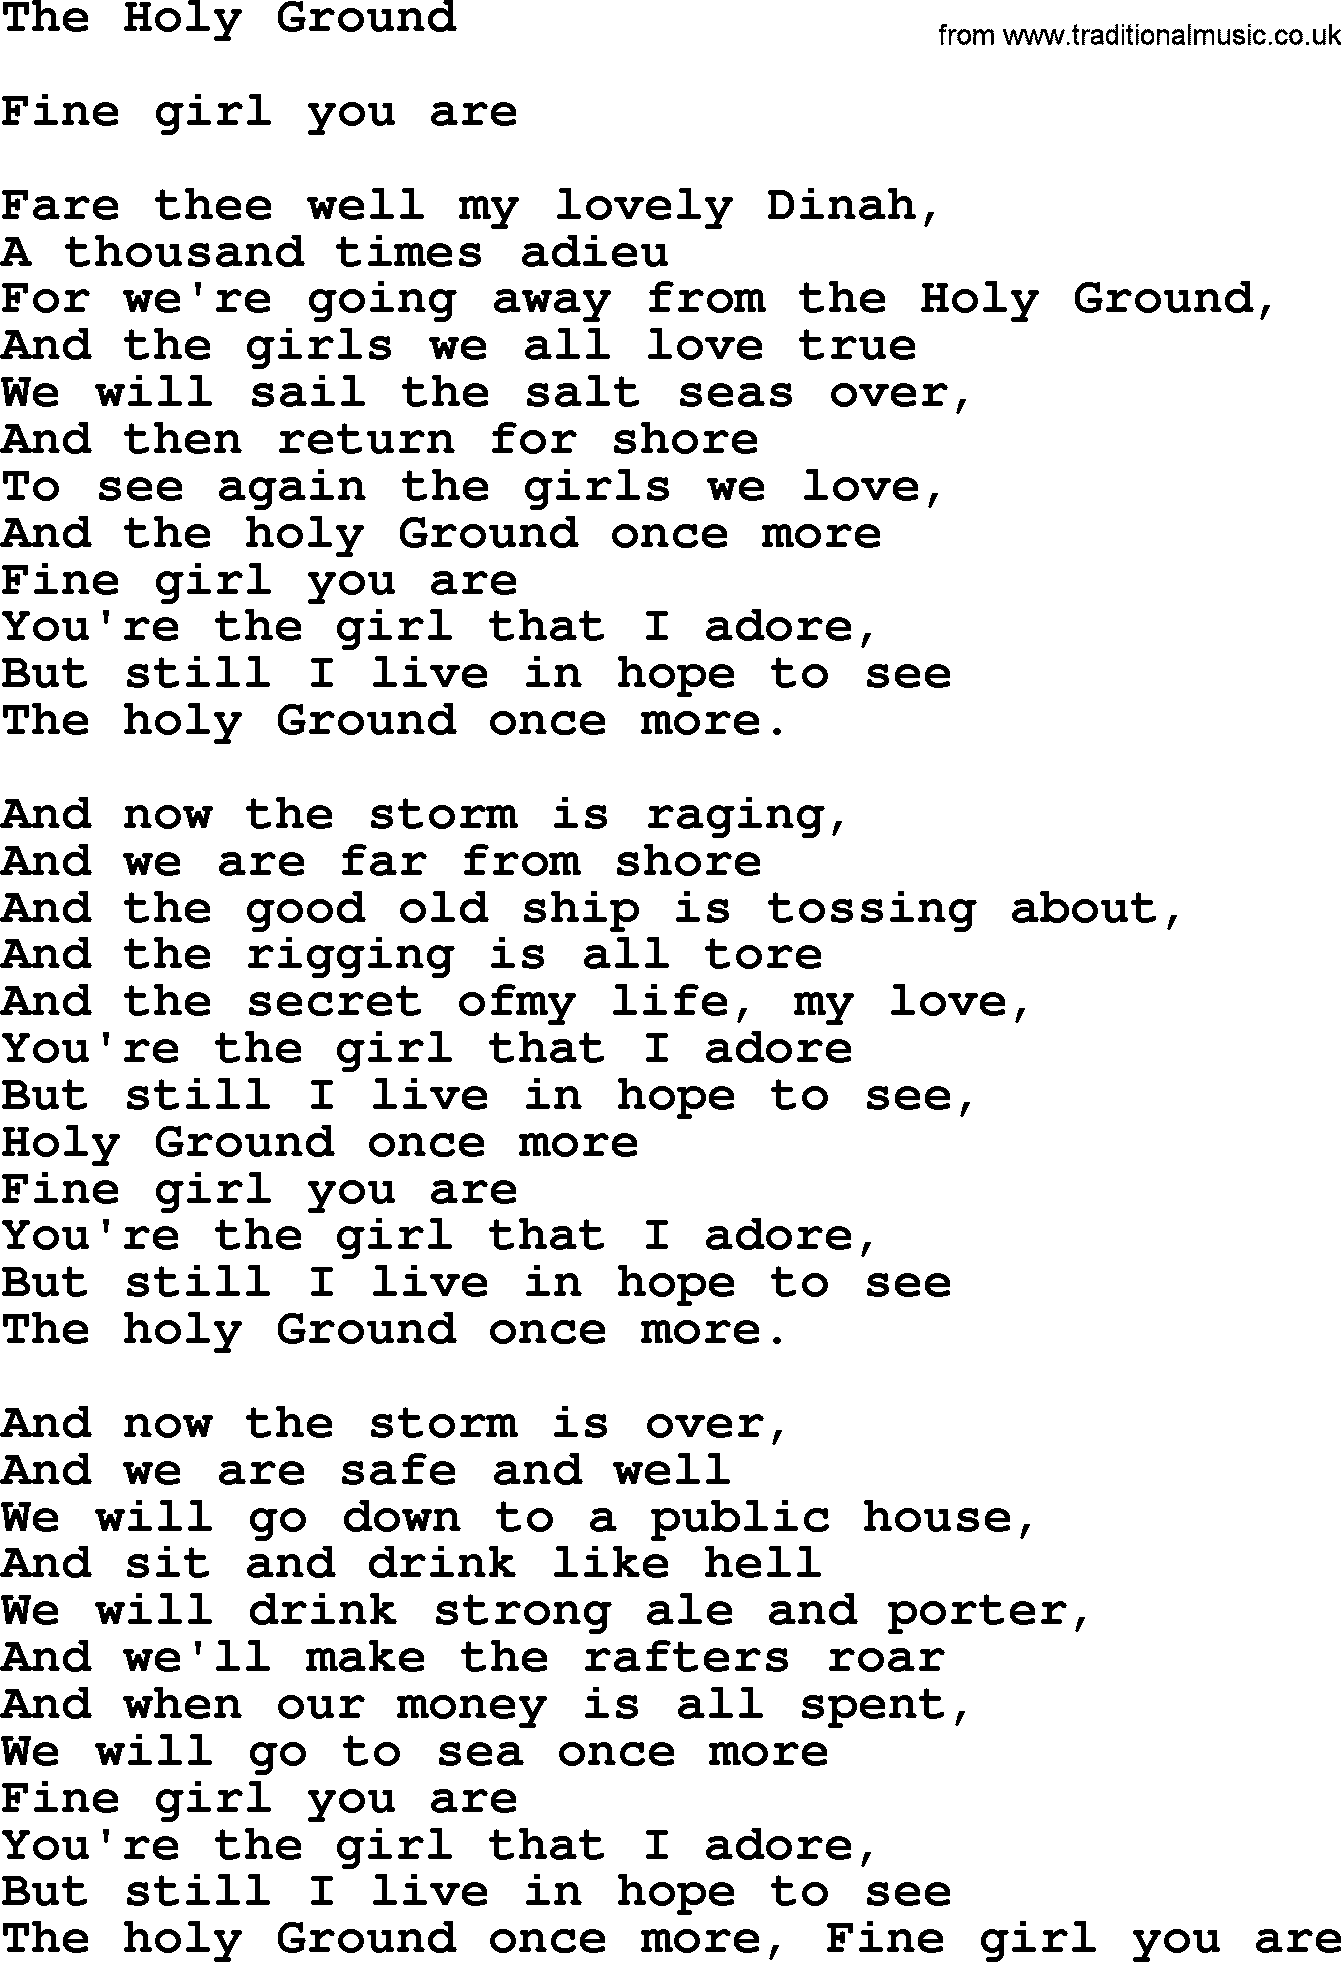 The Dubliners song: The Holy Ground, lyrics